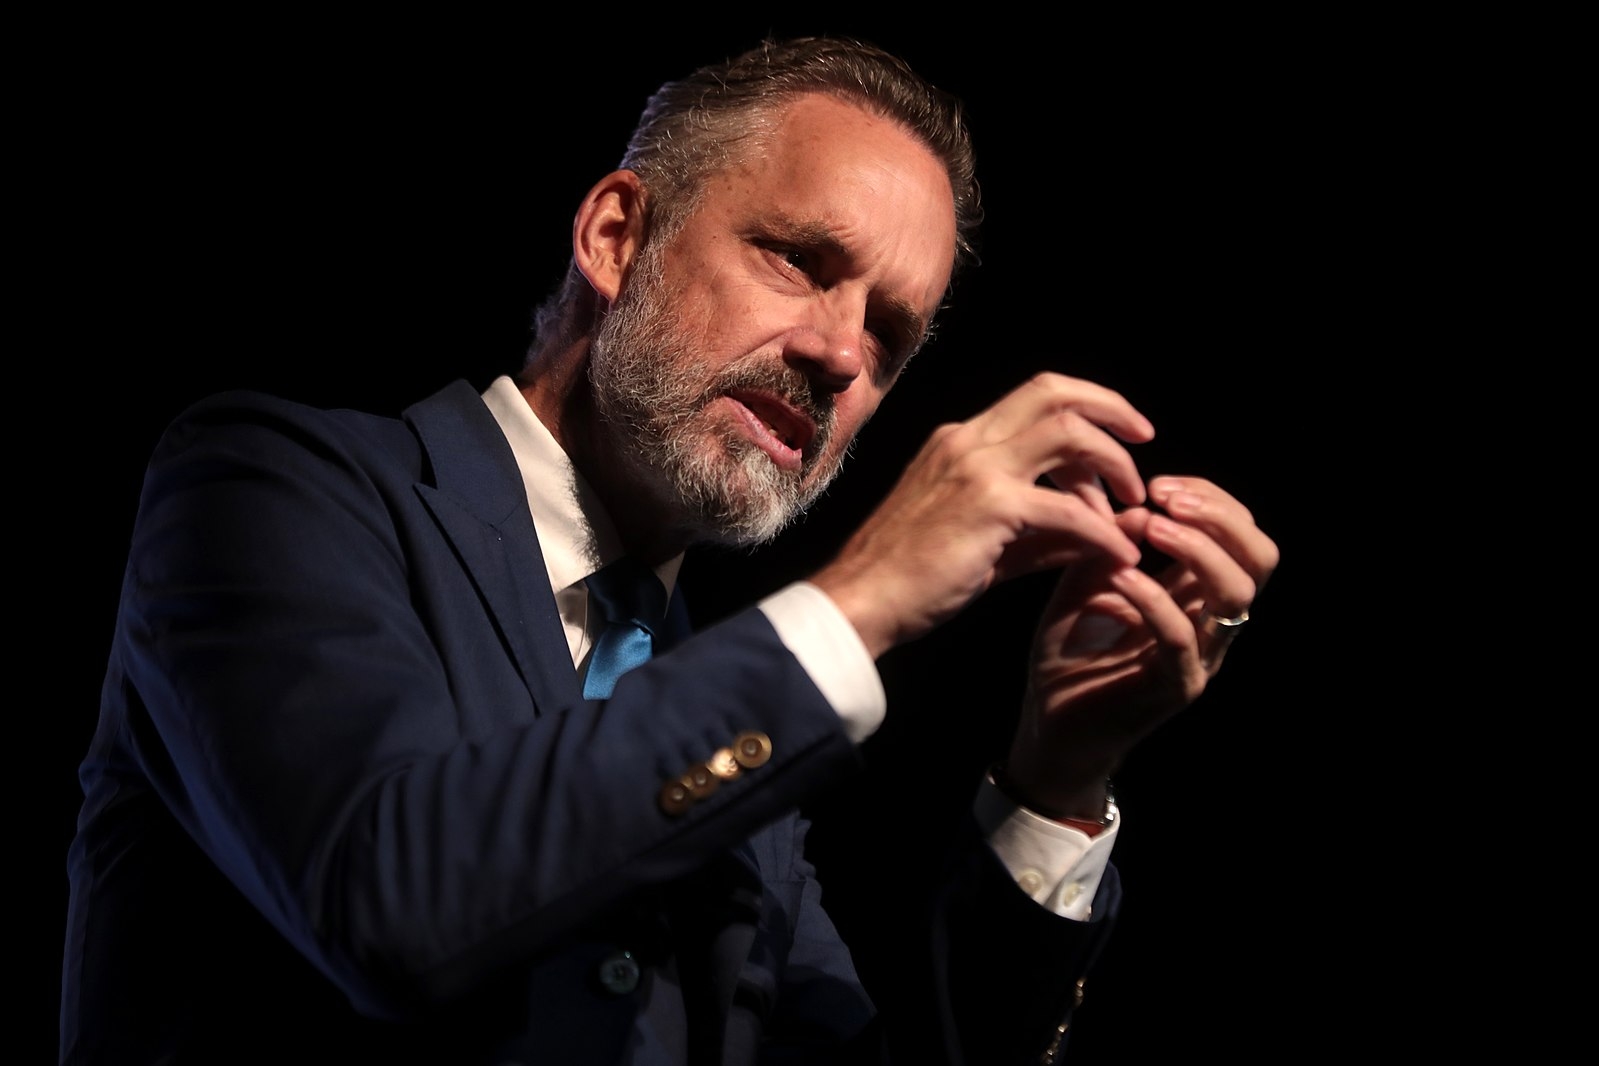 Jordan Peterson delivering a speech at a podium with a focused expression on his face. (Wikimedia Commons)